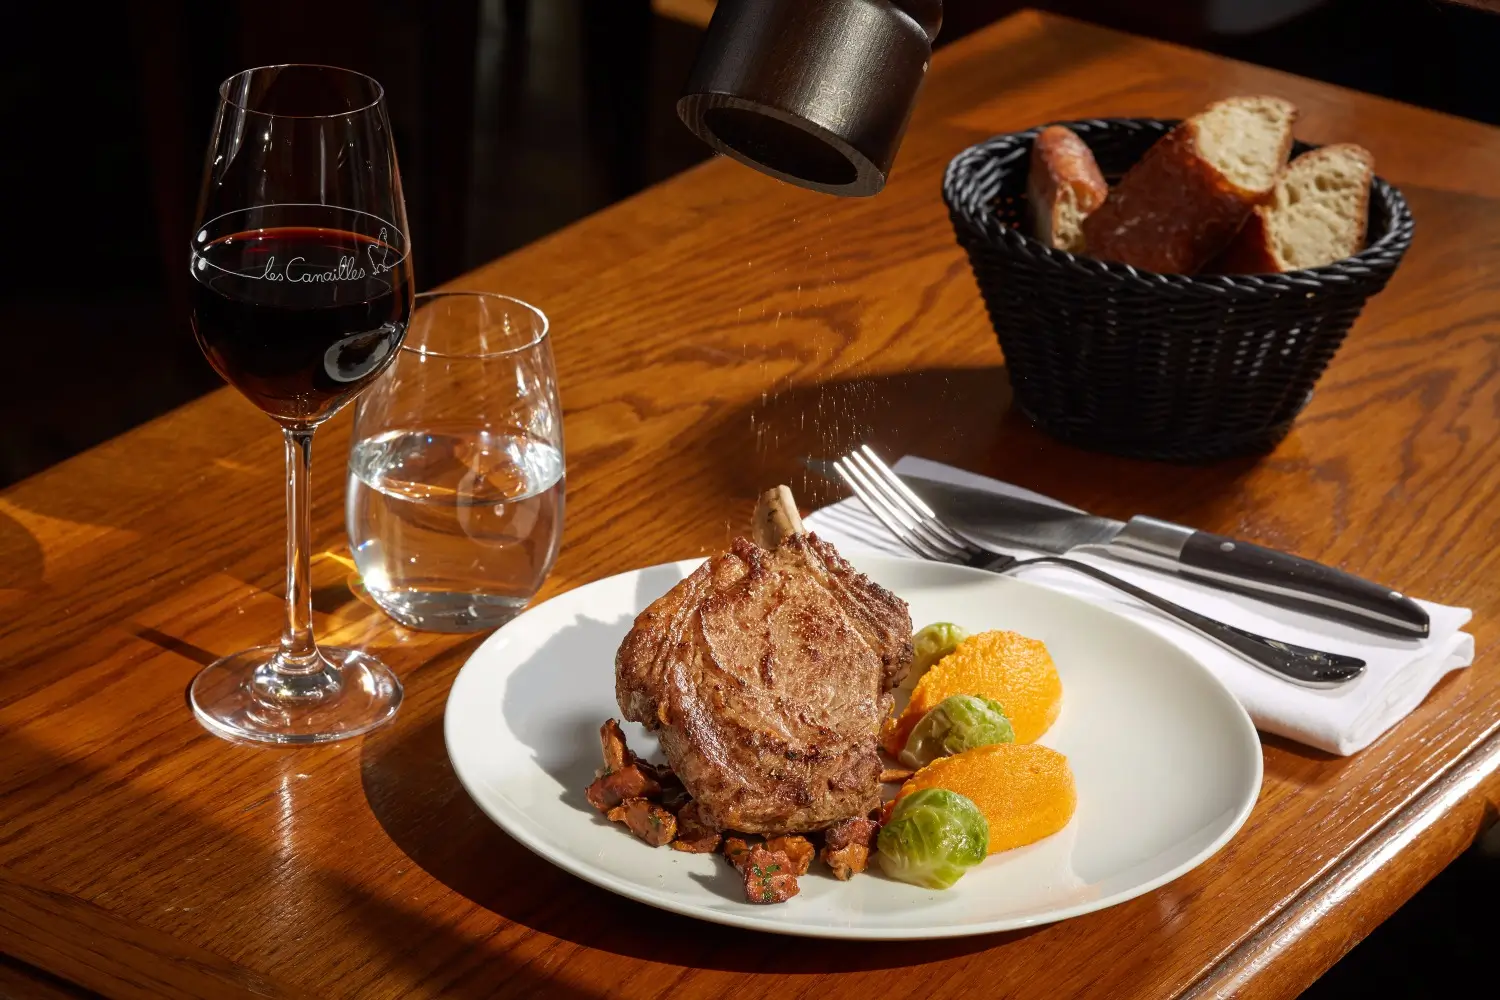 A perfectly cooked steak served with root vegetables on a white plate at Les Canailles bistro in Paris, paired with a glass of red wine, creating an inviting meal setting.